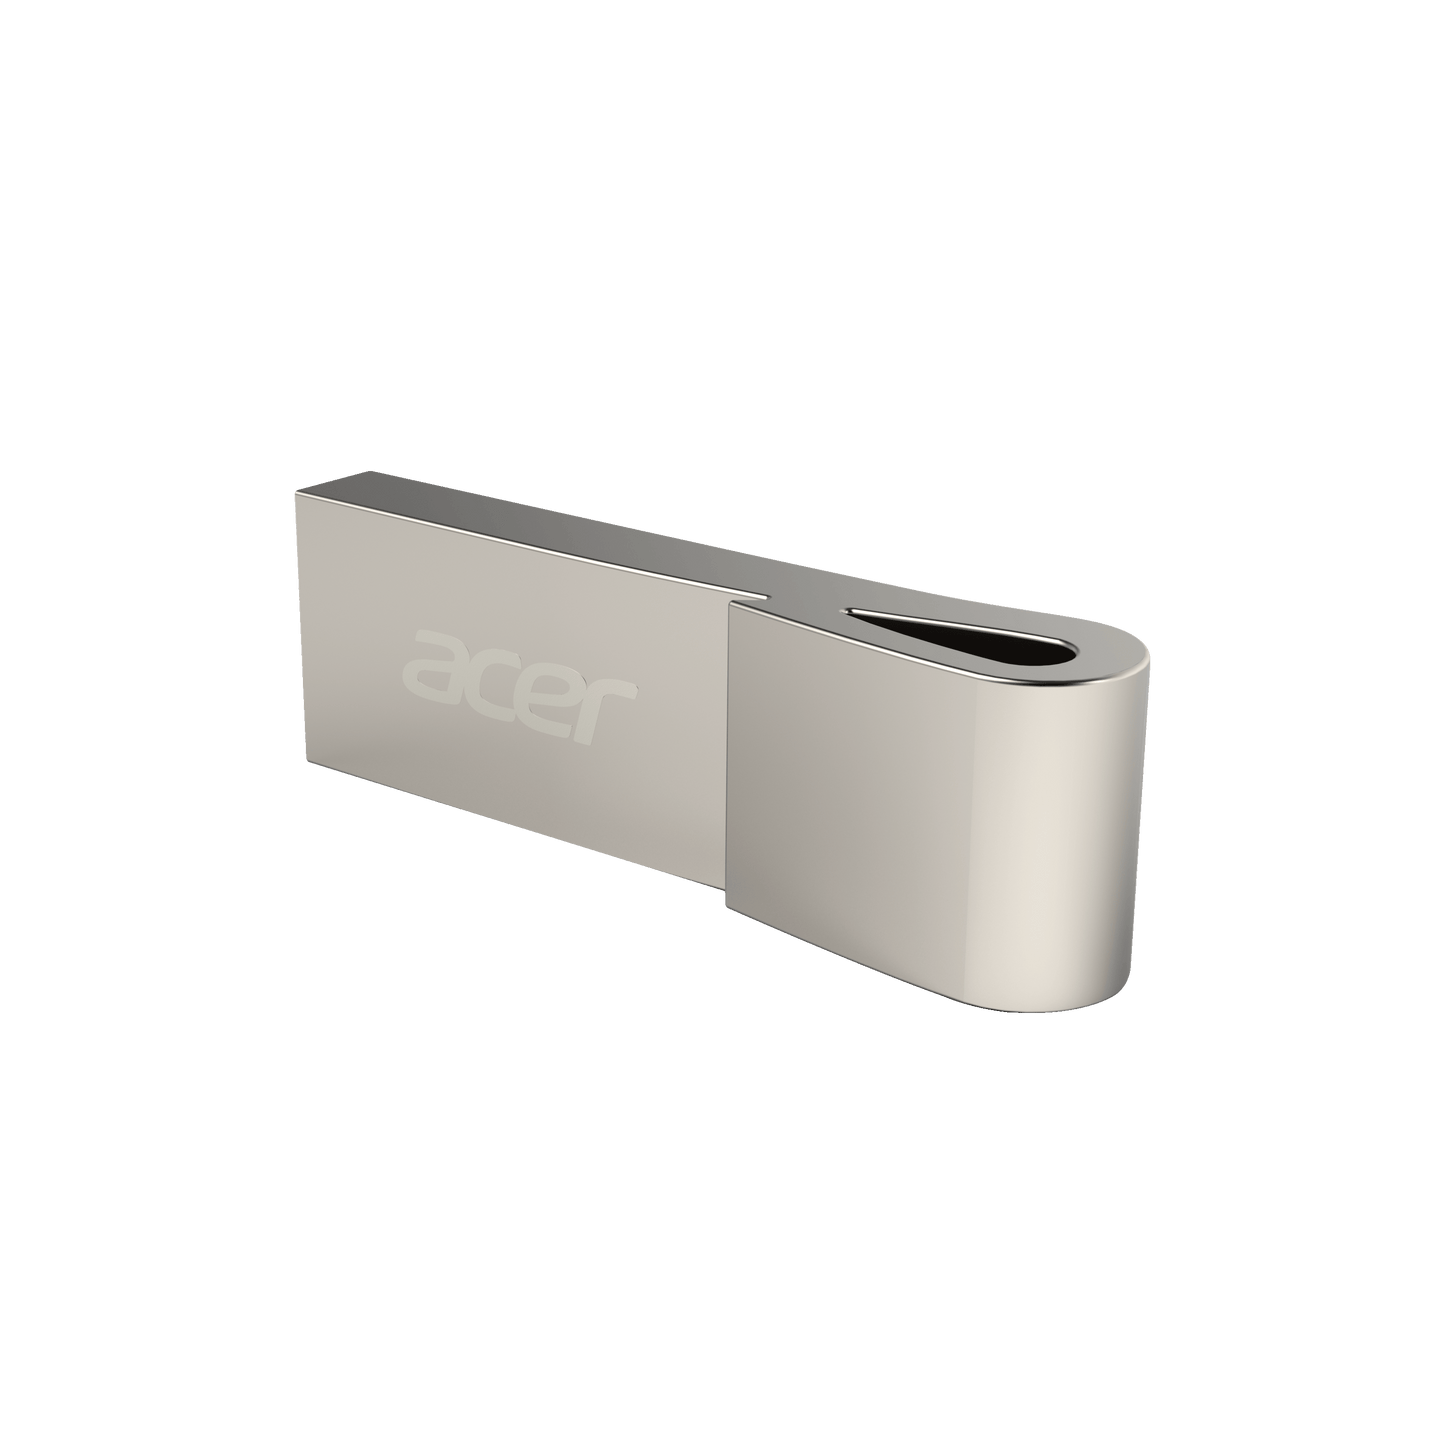 Acer UF200 UDP USB 2.0 Flash Drive (32GB) Reliable portable storage for work, home and school Media 1 of 4